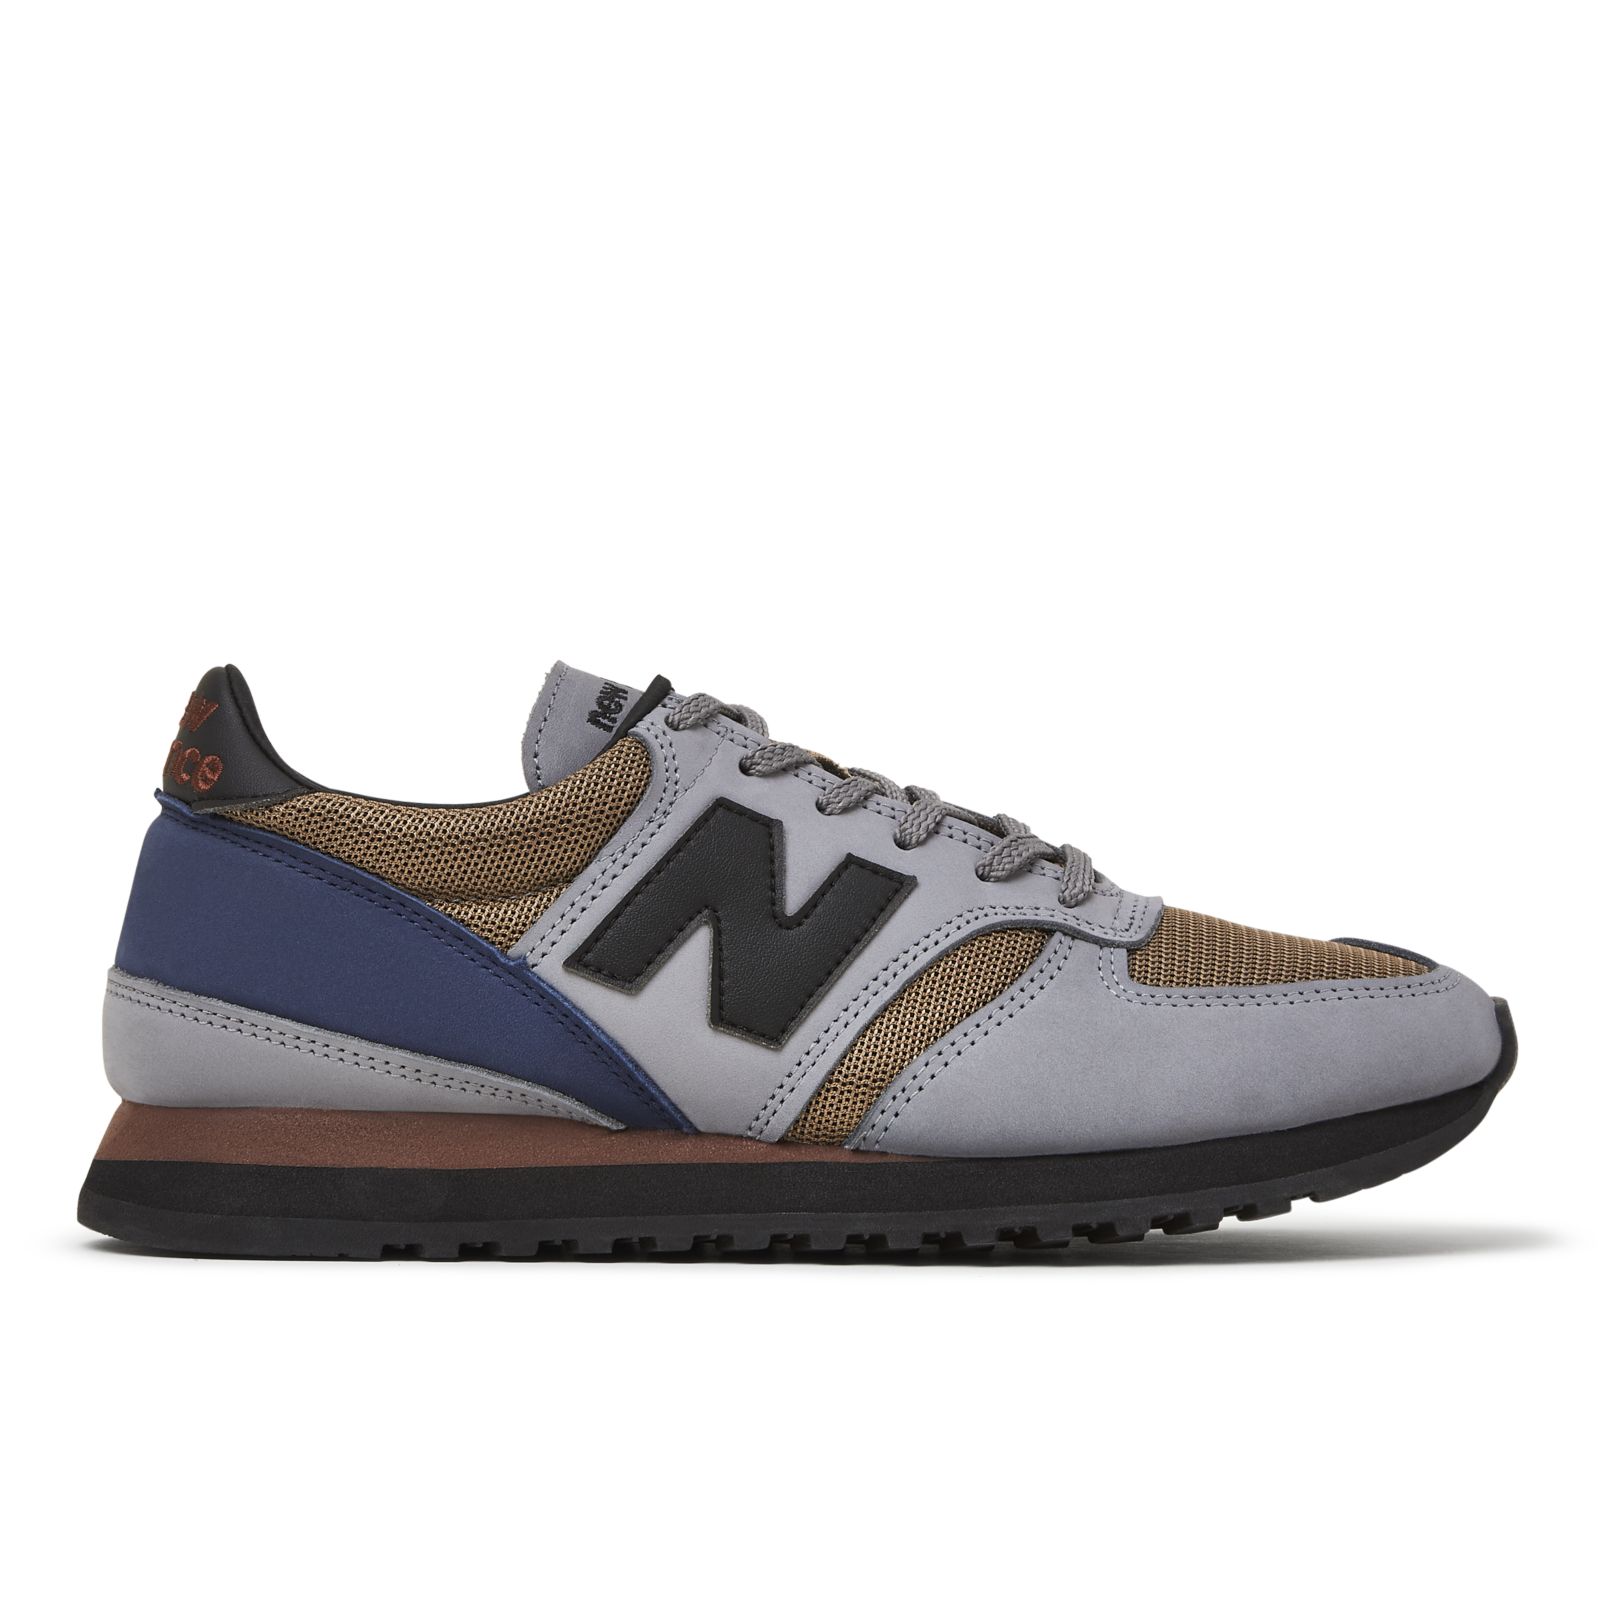 New Balance Made In England Shop Online On SPECTRUM | lupon.gov.ph